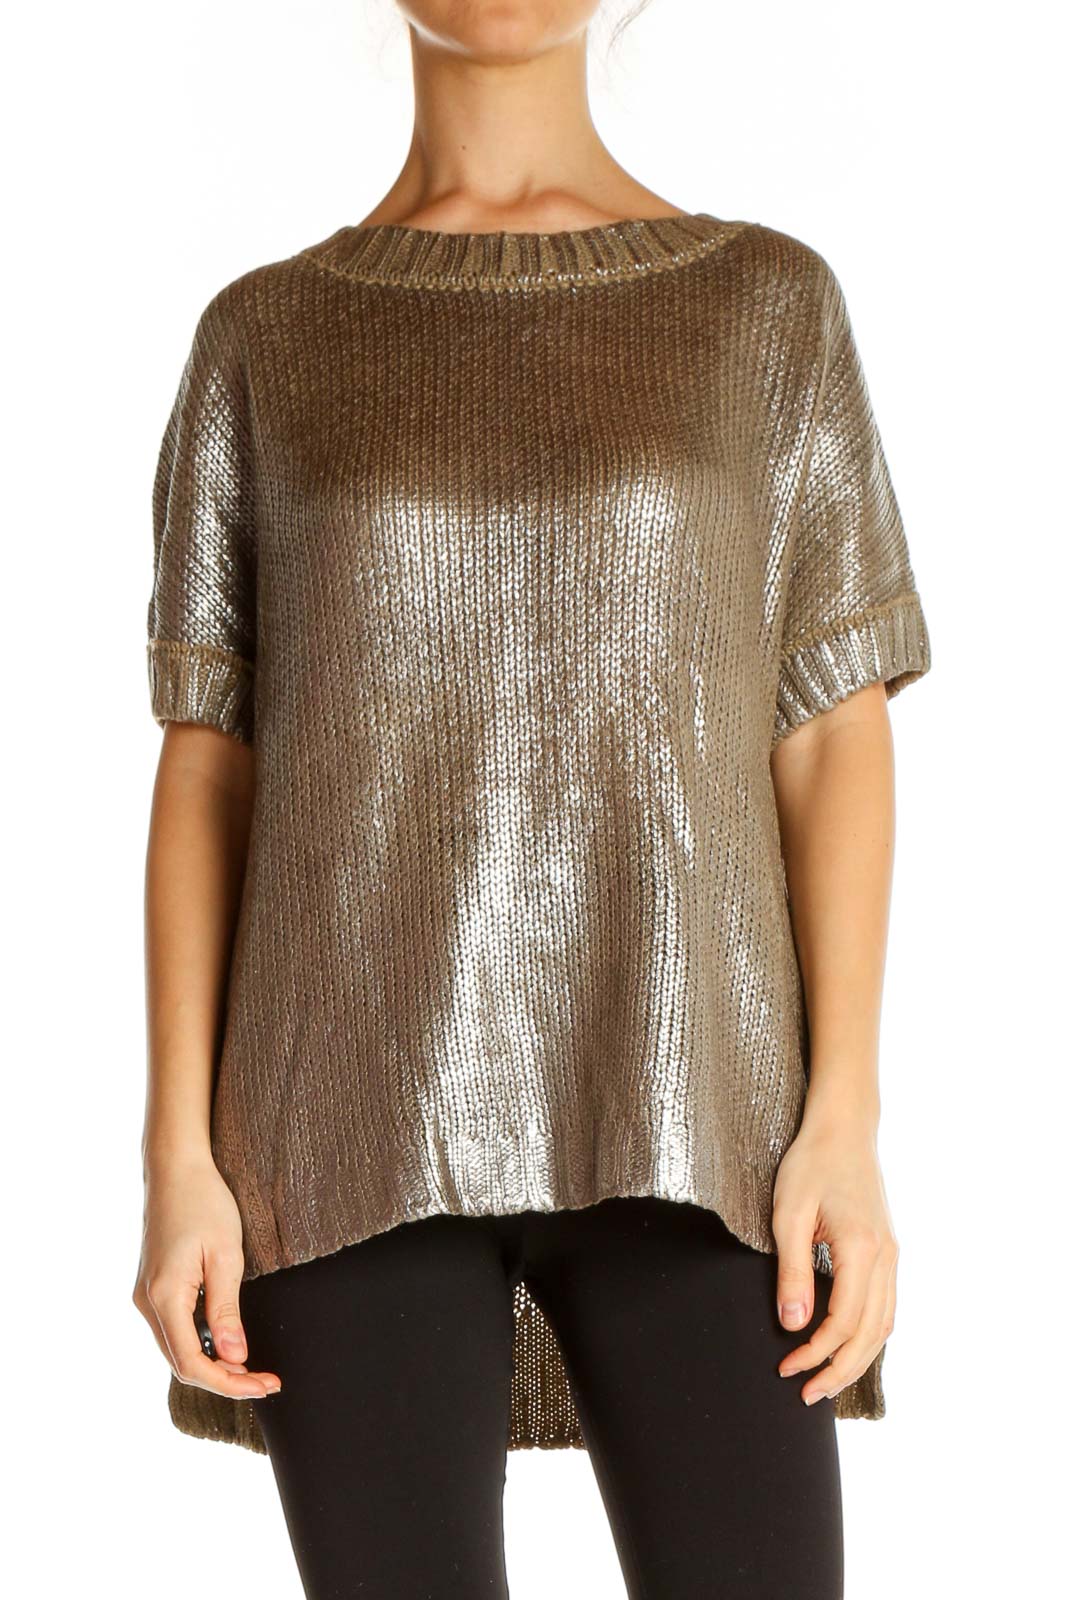 Brown Textured Chic Sweater Front